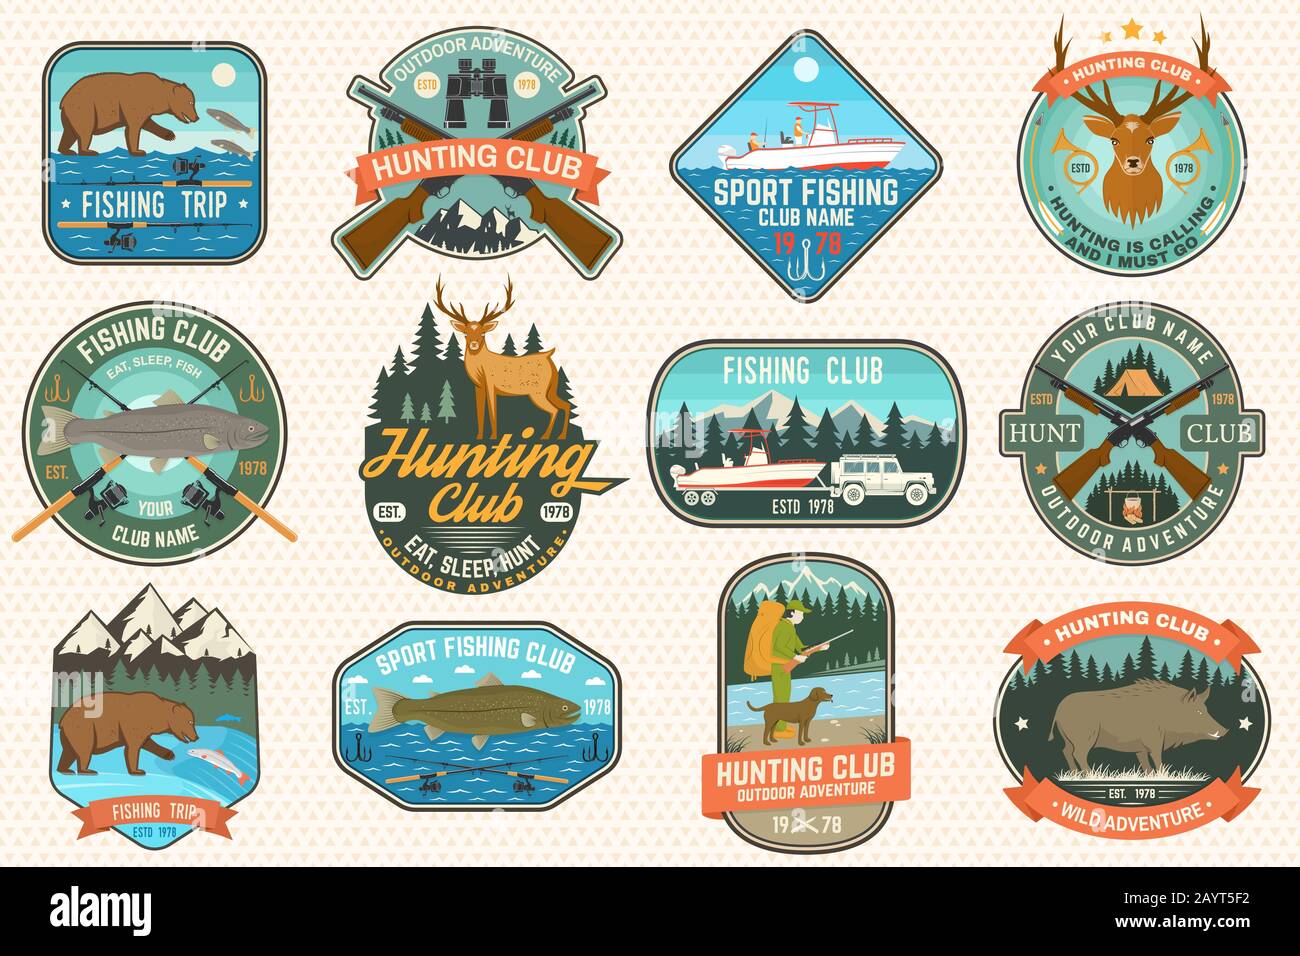 Fishing and hunting camp Stock Vector Images - Alamy